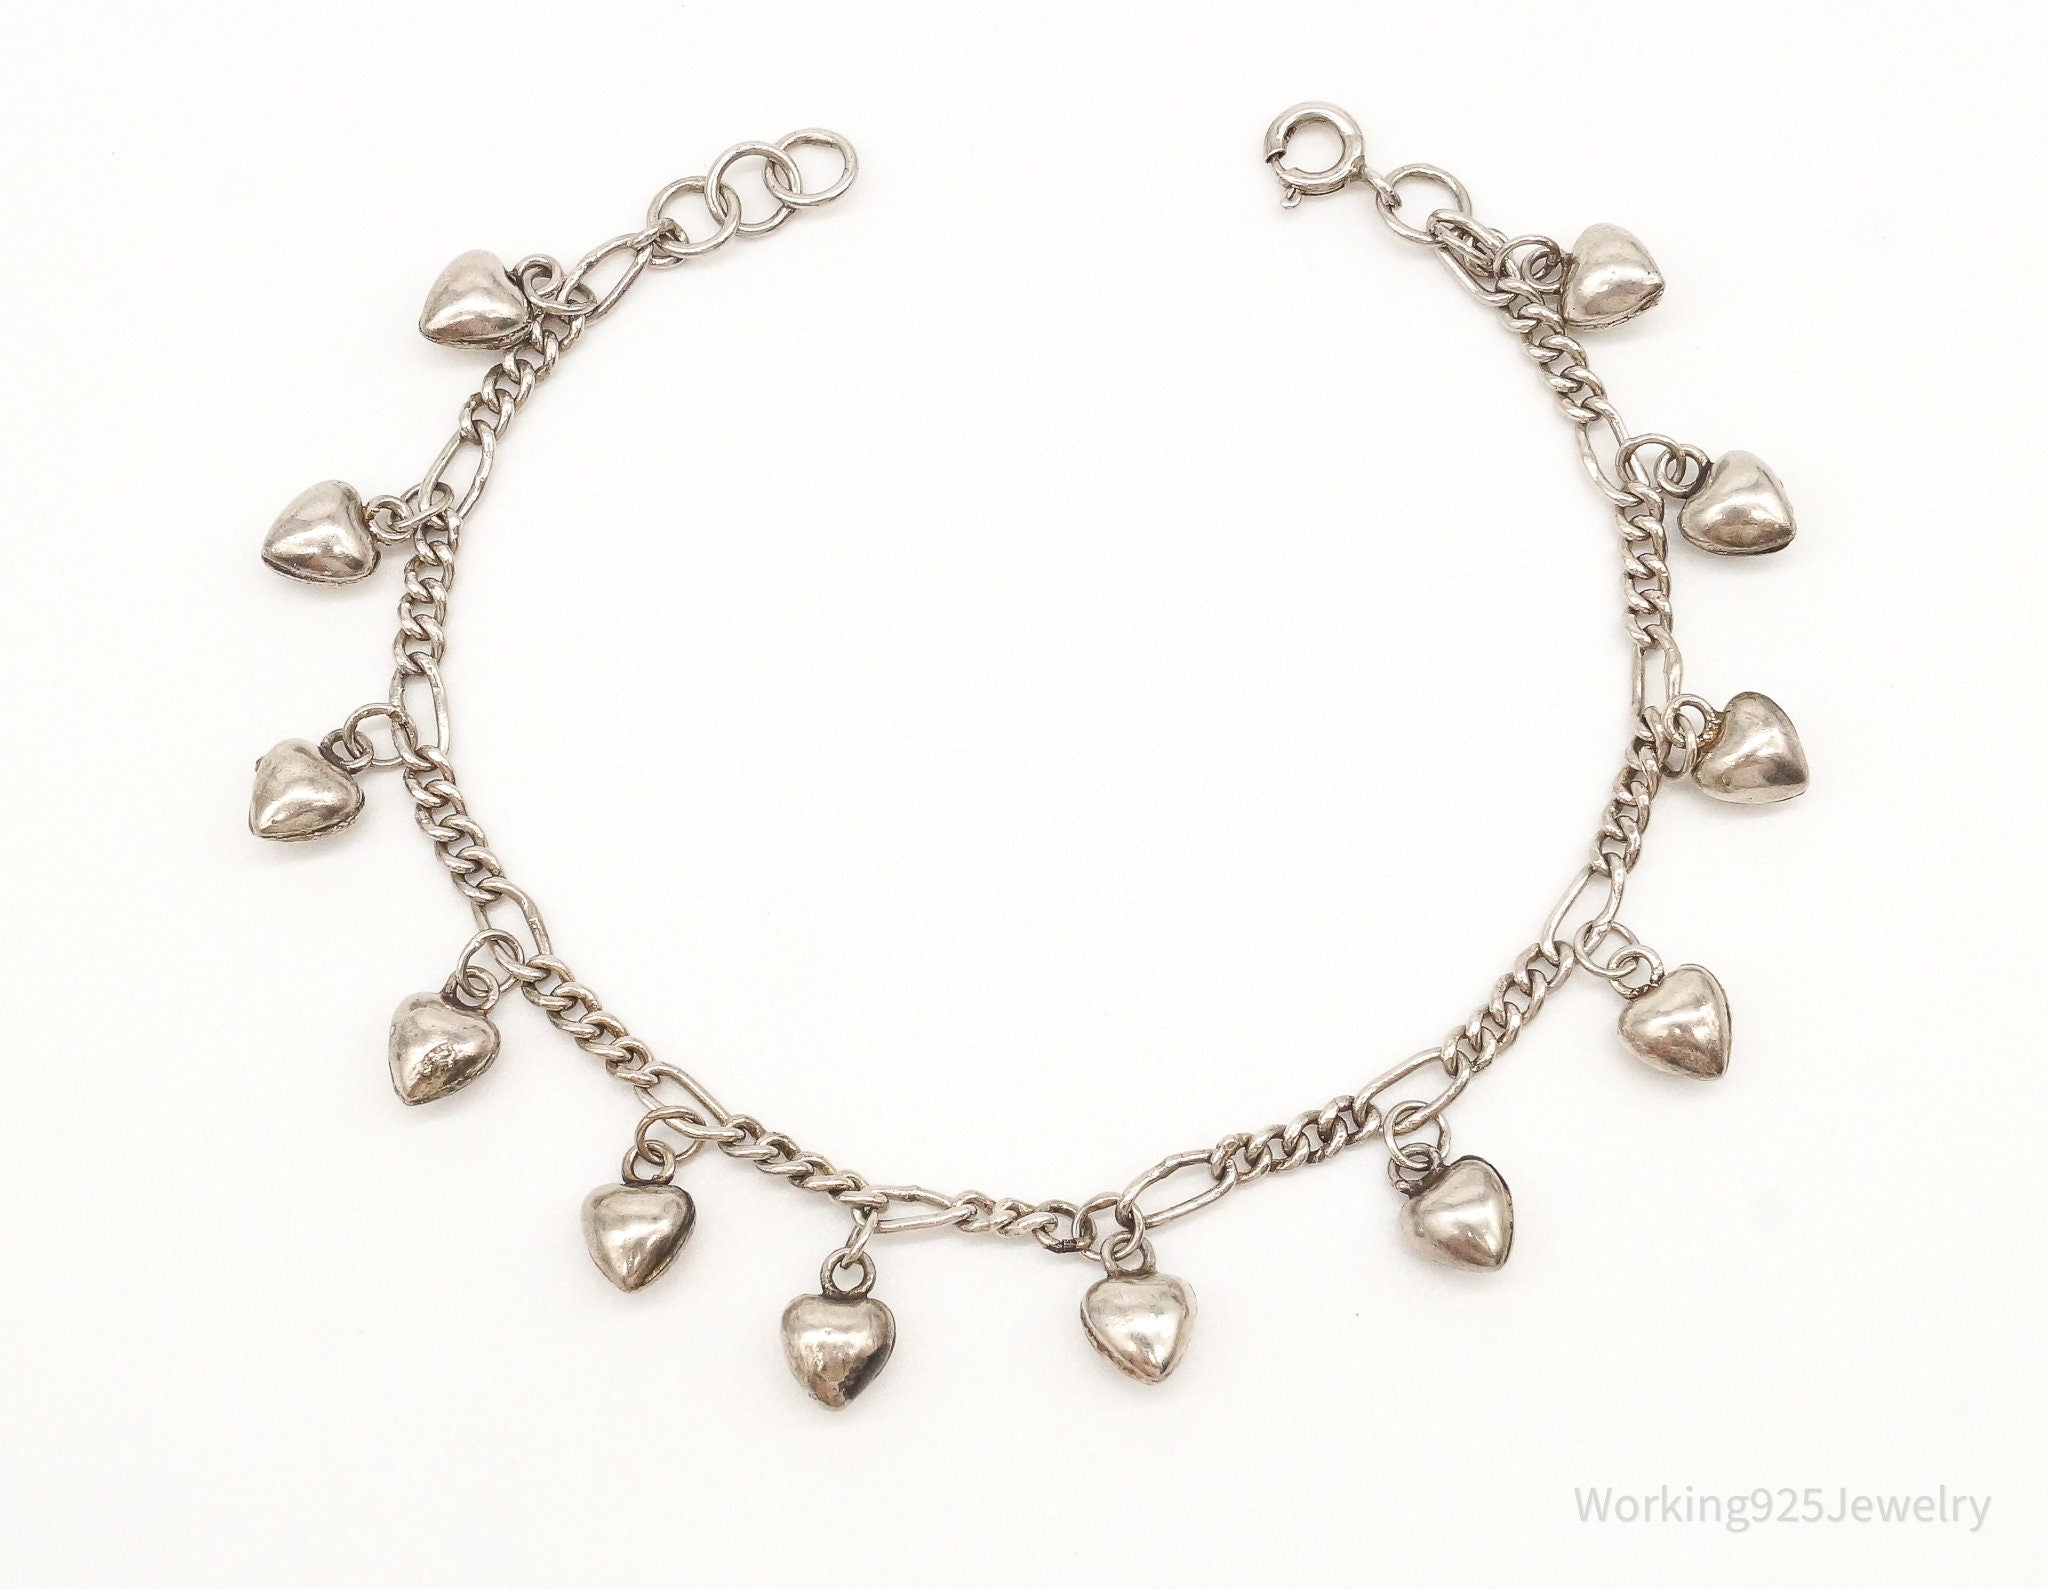 Vintage Mini Puffy Heart Charms Sterling Silver Chain Bracelet